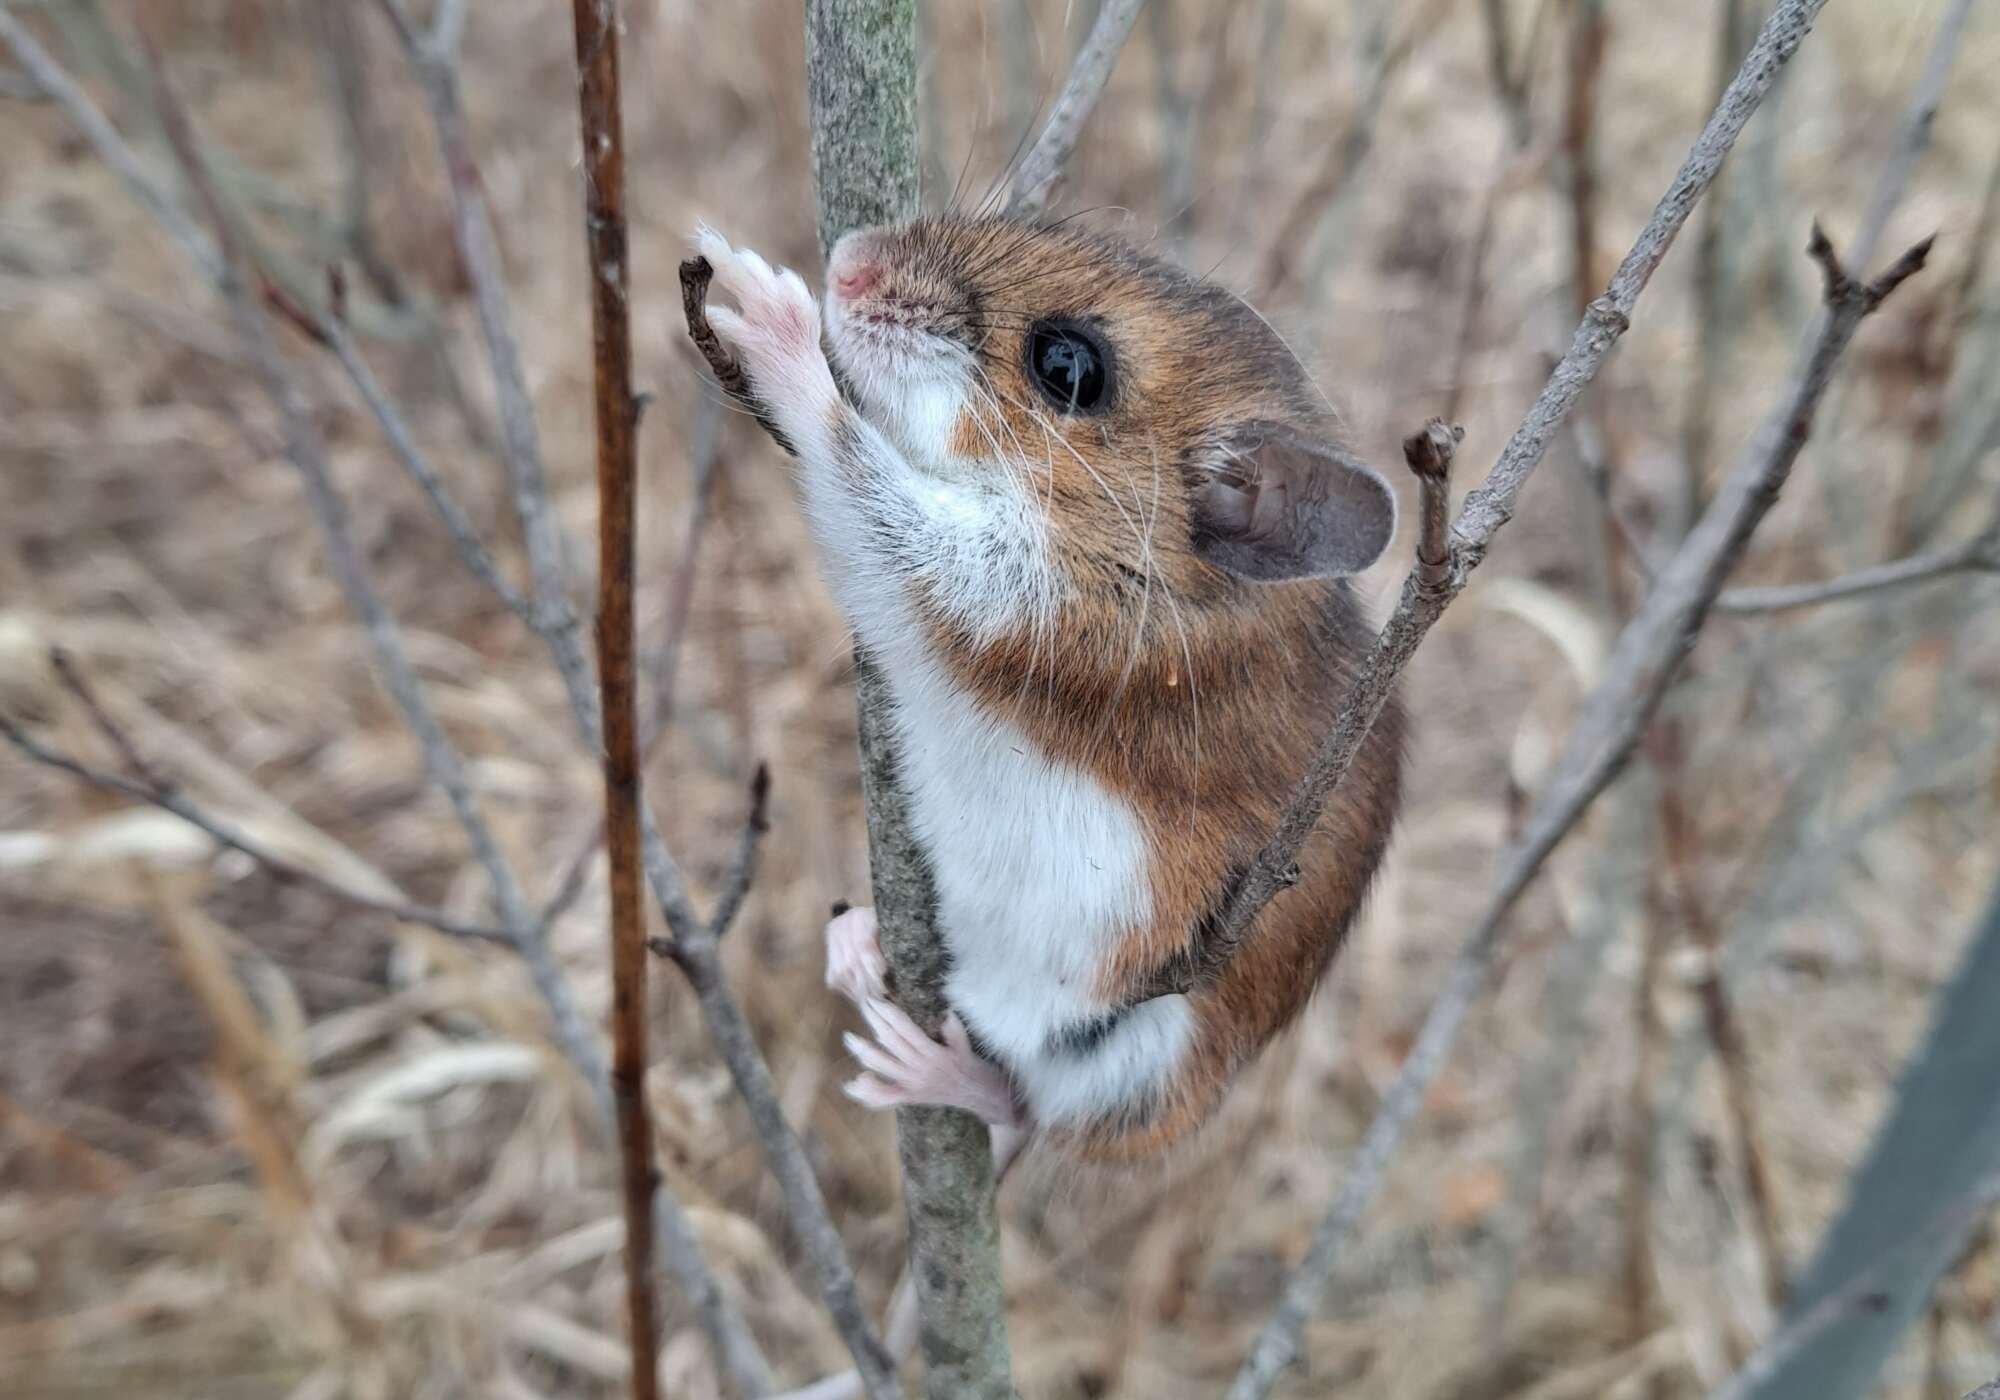 White-footed Deermouse observation shared with the Vermont Atlas of Life on iNaturalist (https://www.inaturalist.org/observations/148828022) meltraros